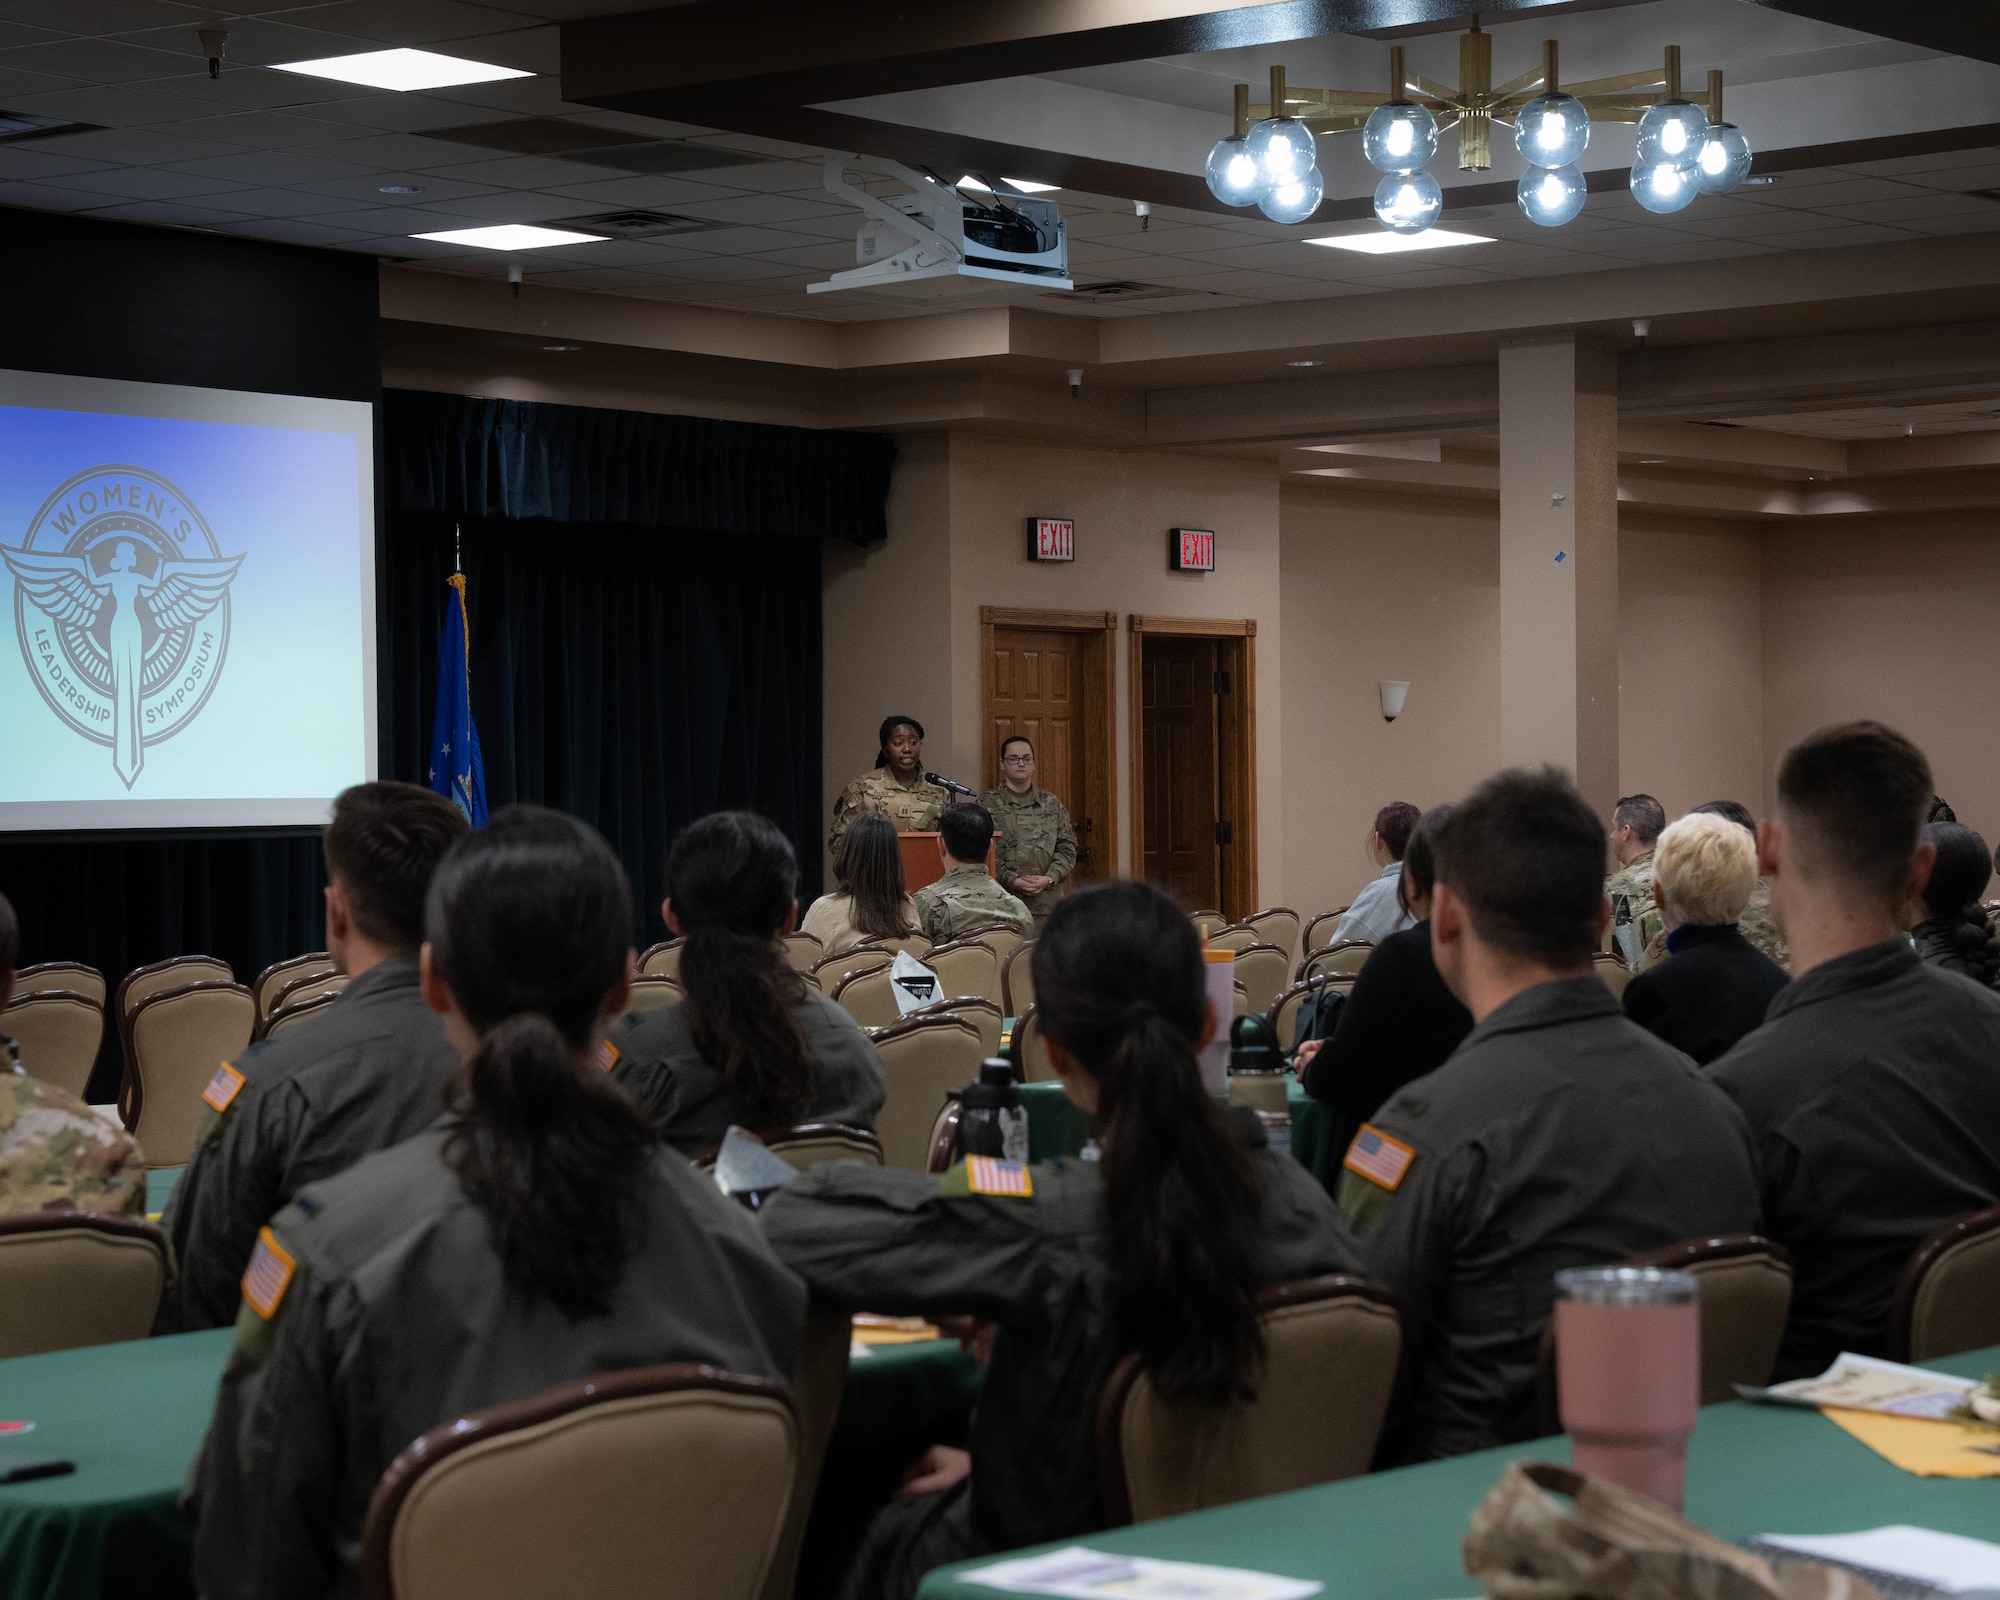 U.S. Air Force Capt. Darian Reeder, 3rd Special Operations Squadron executive officer, speaks to attendees of the 2nd Annual Women’s Leadership Symposium at Cannon Air Force Base, N.M., on March 15, 2024. The Women’s Leadership Symposium’s mission is to send a message of professional development, inclusivity and commitment aiming to inspire and empower everyone at Cannon AFB. (U.S. Air Force Photo by Senior Airman Mateo Parra)